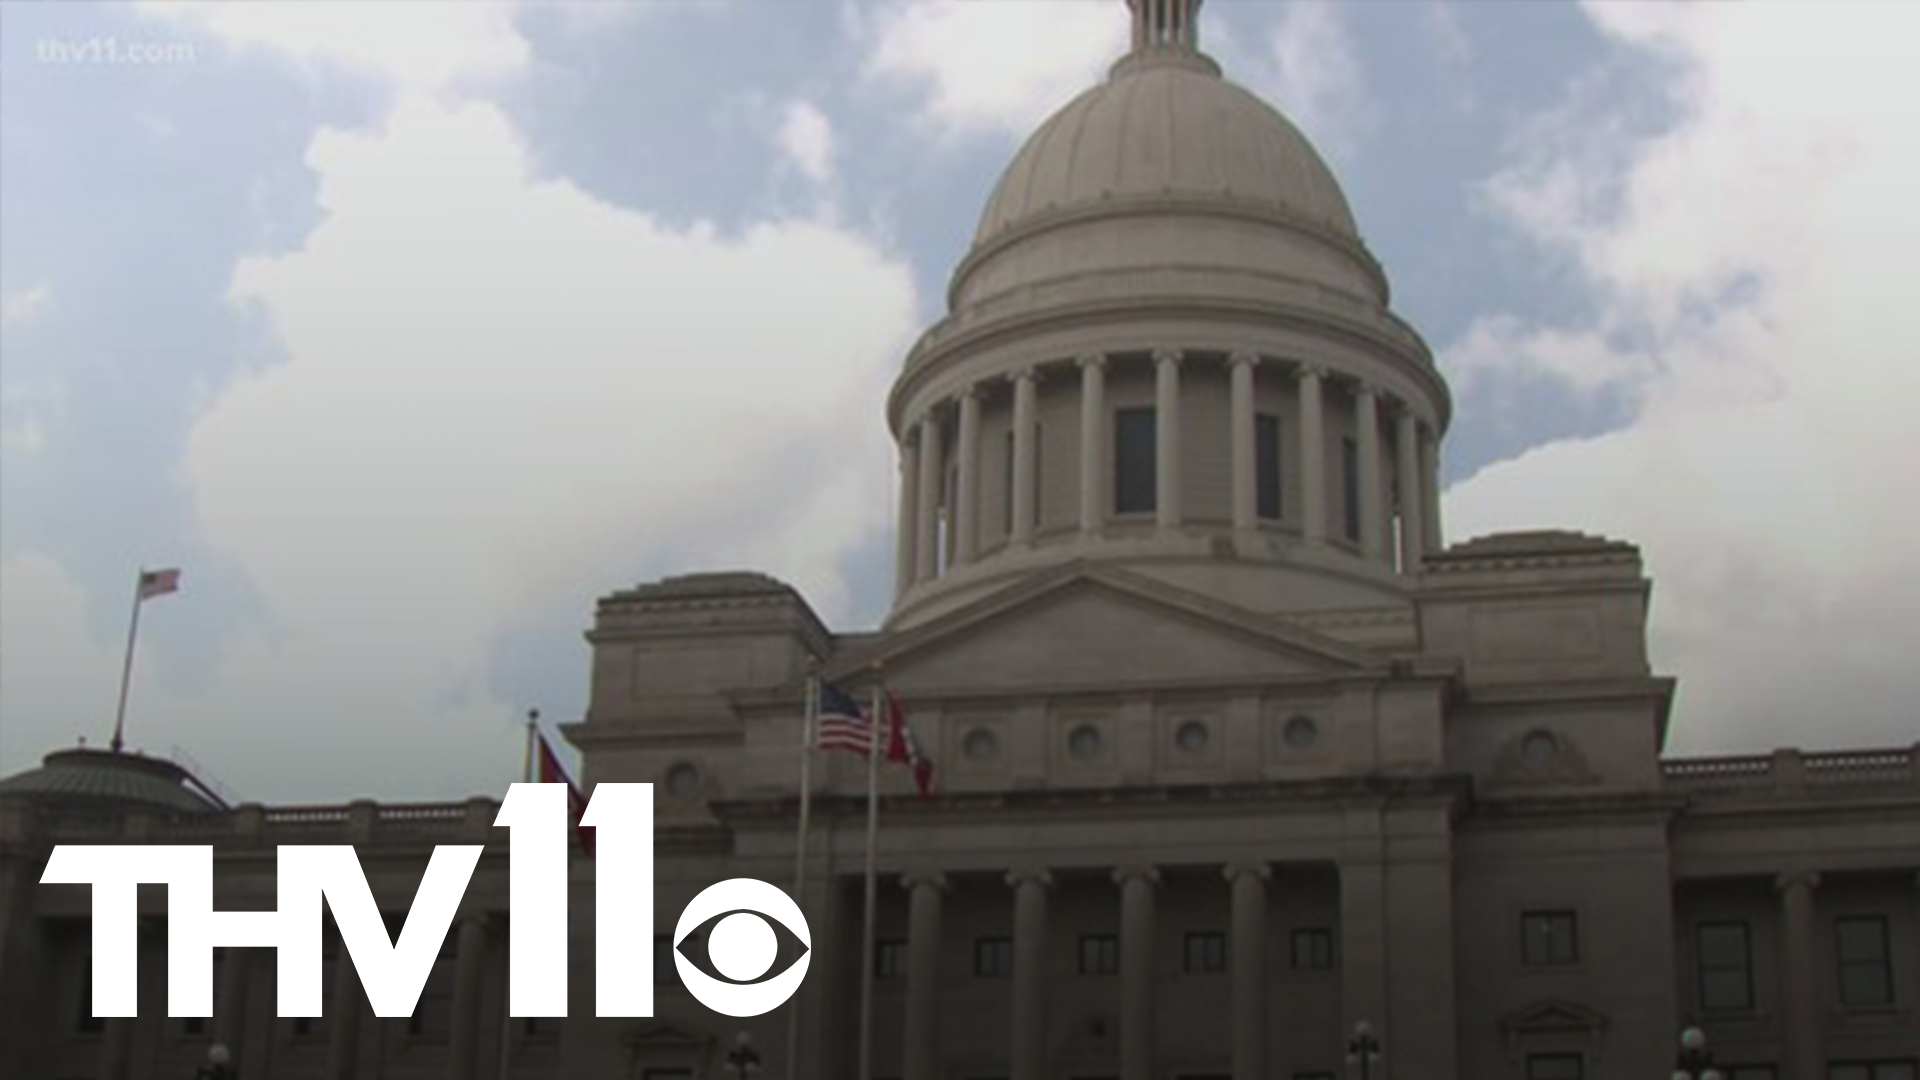 A new set of Arkansas laws will go into effect on Wednesday. Some laws include a mask mandate ban, restrictive abortion laws, and limits for transgender students.